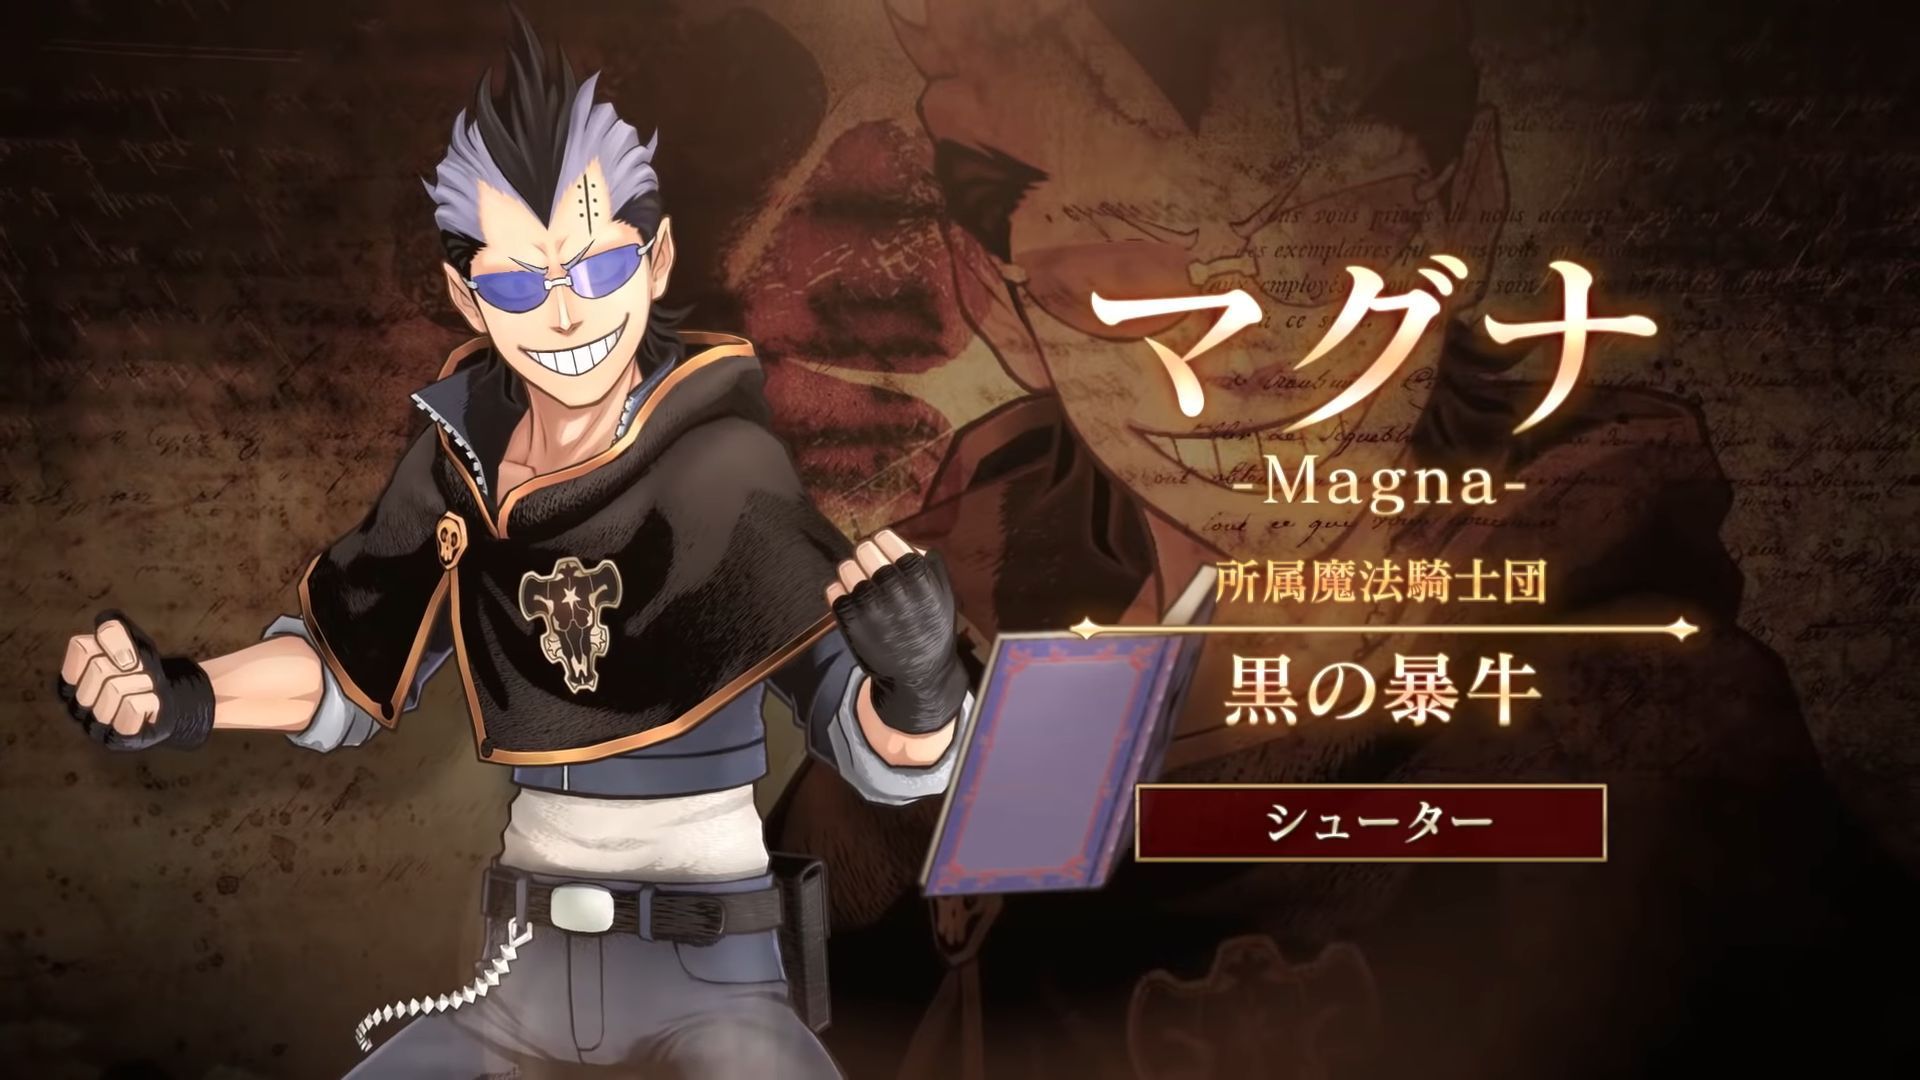 Black Clover: Quartet Knights for PS4 and PC Shows Magna Swing